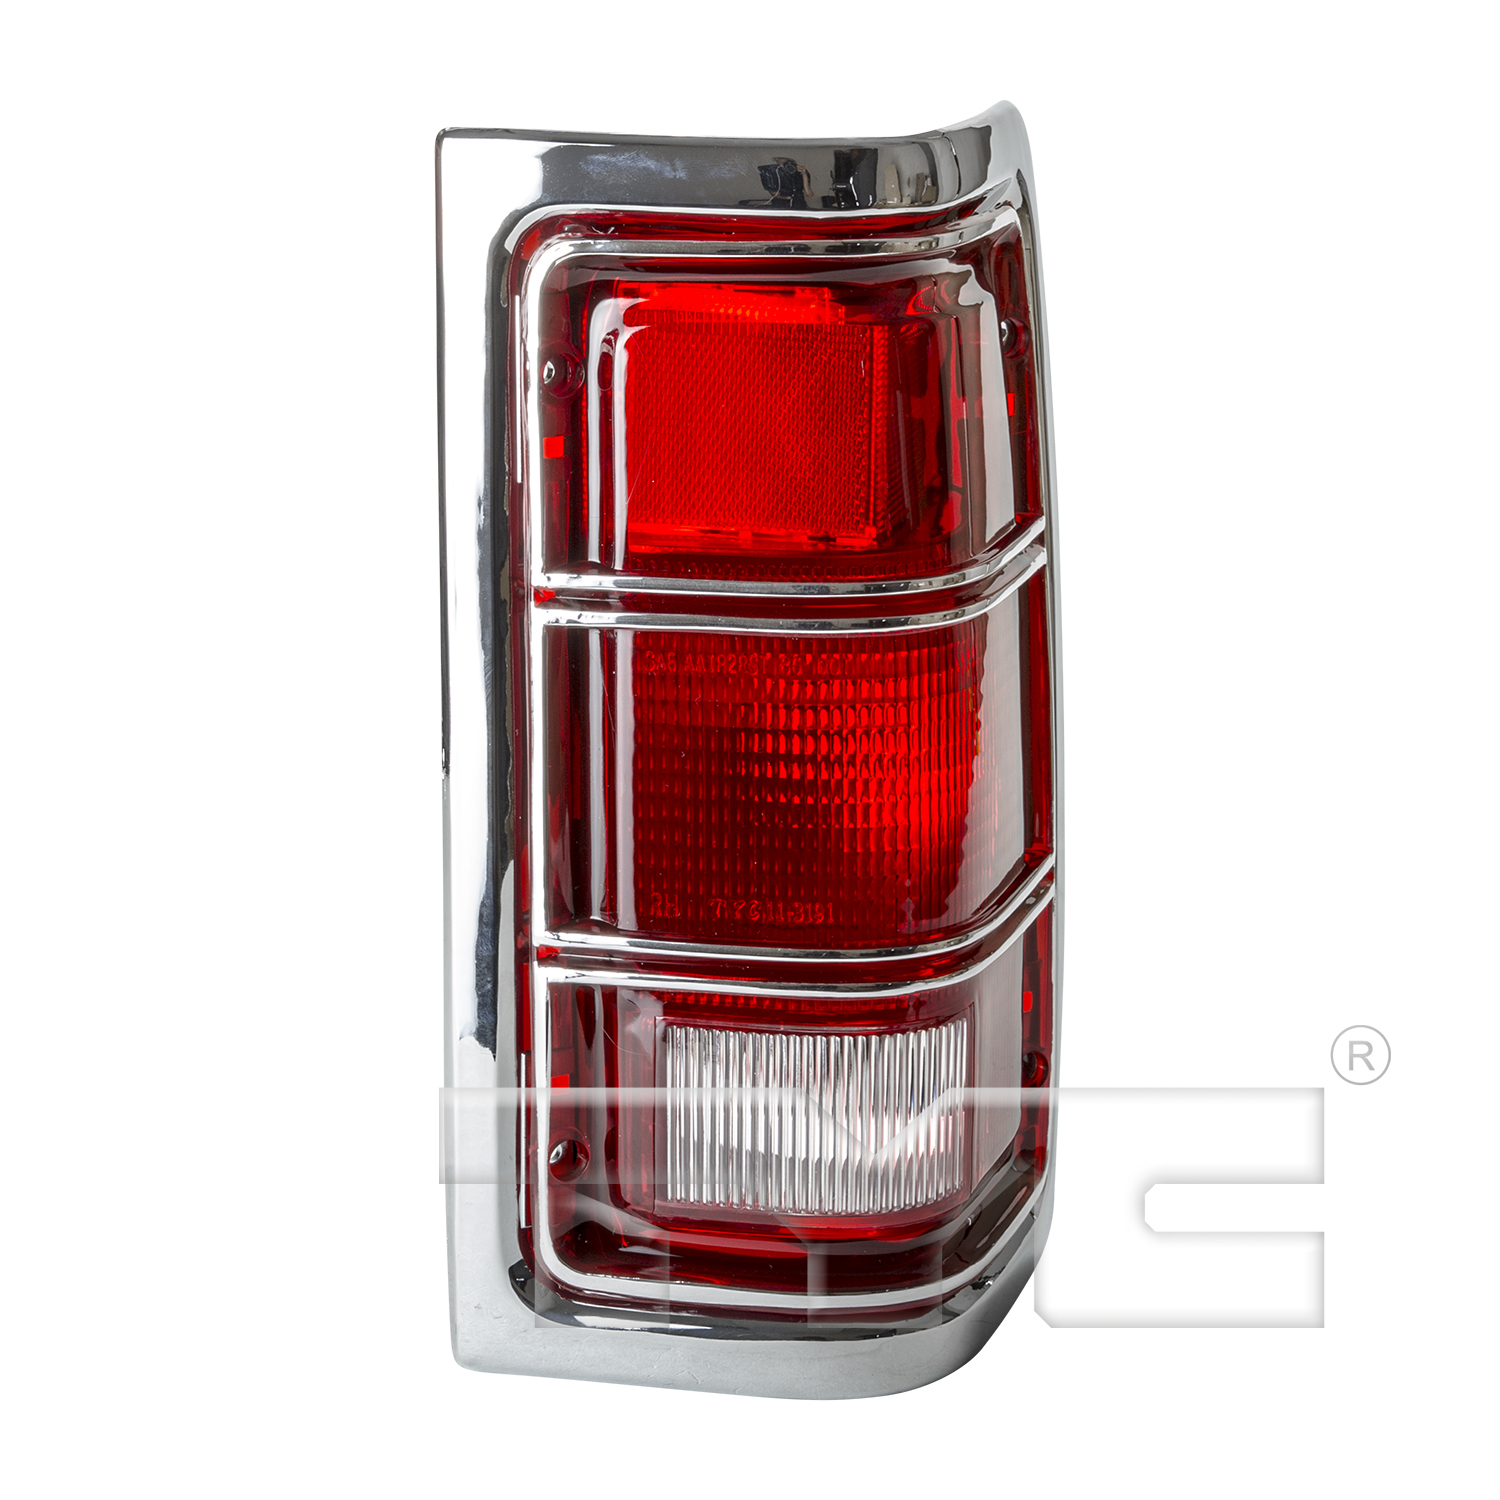 Aftermarket TAILLIGHTS for DODGE - W100, W100,84-87,RT Taillamp lens